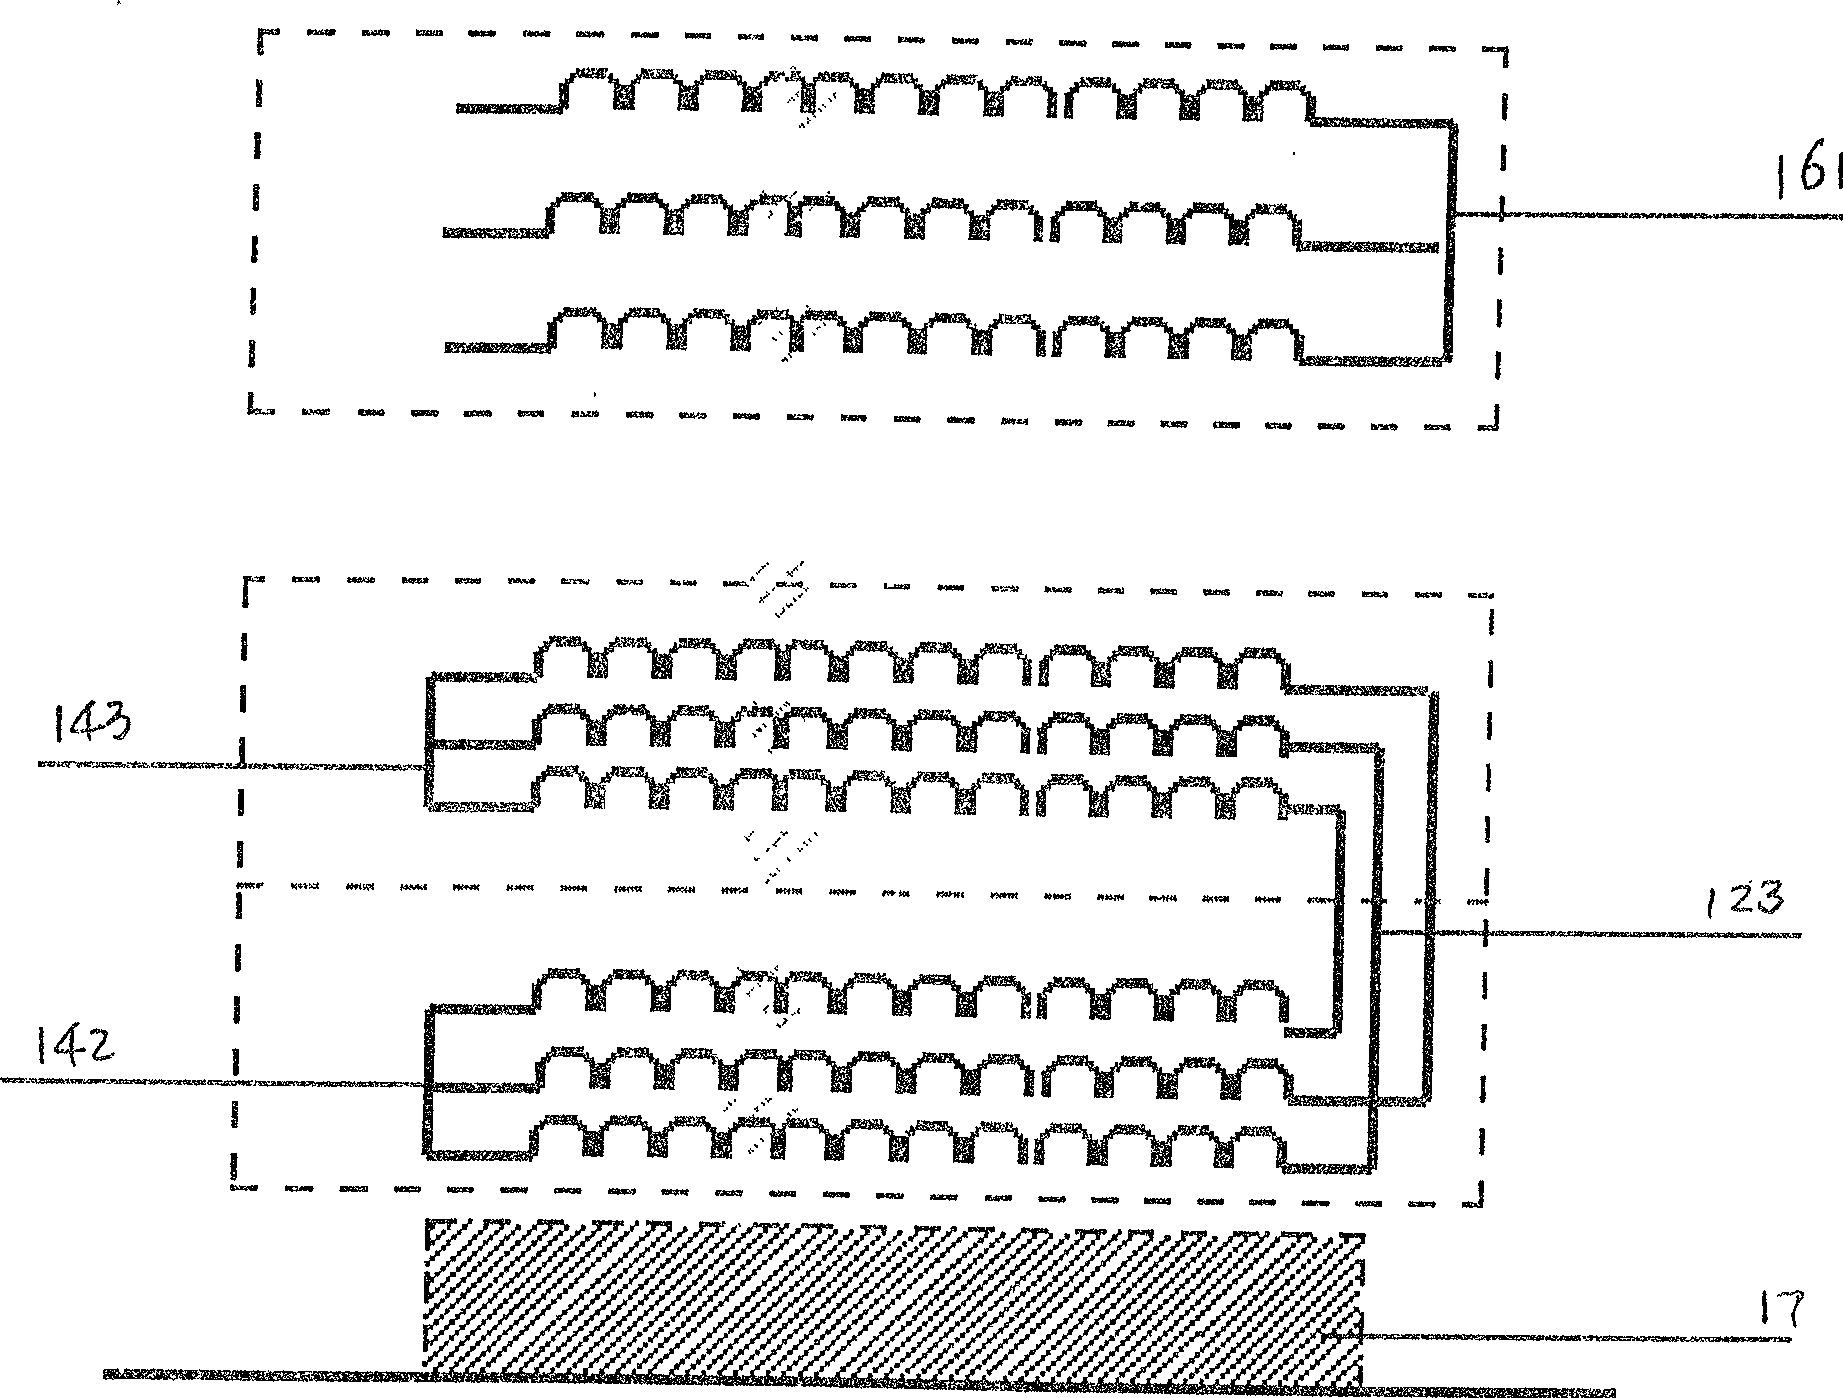 Double-rotor variable speed and variable frequency power generator